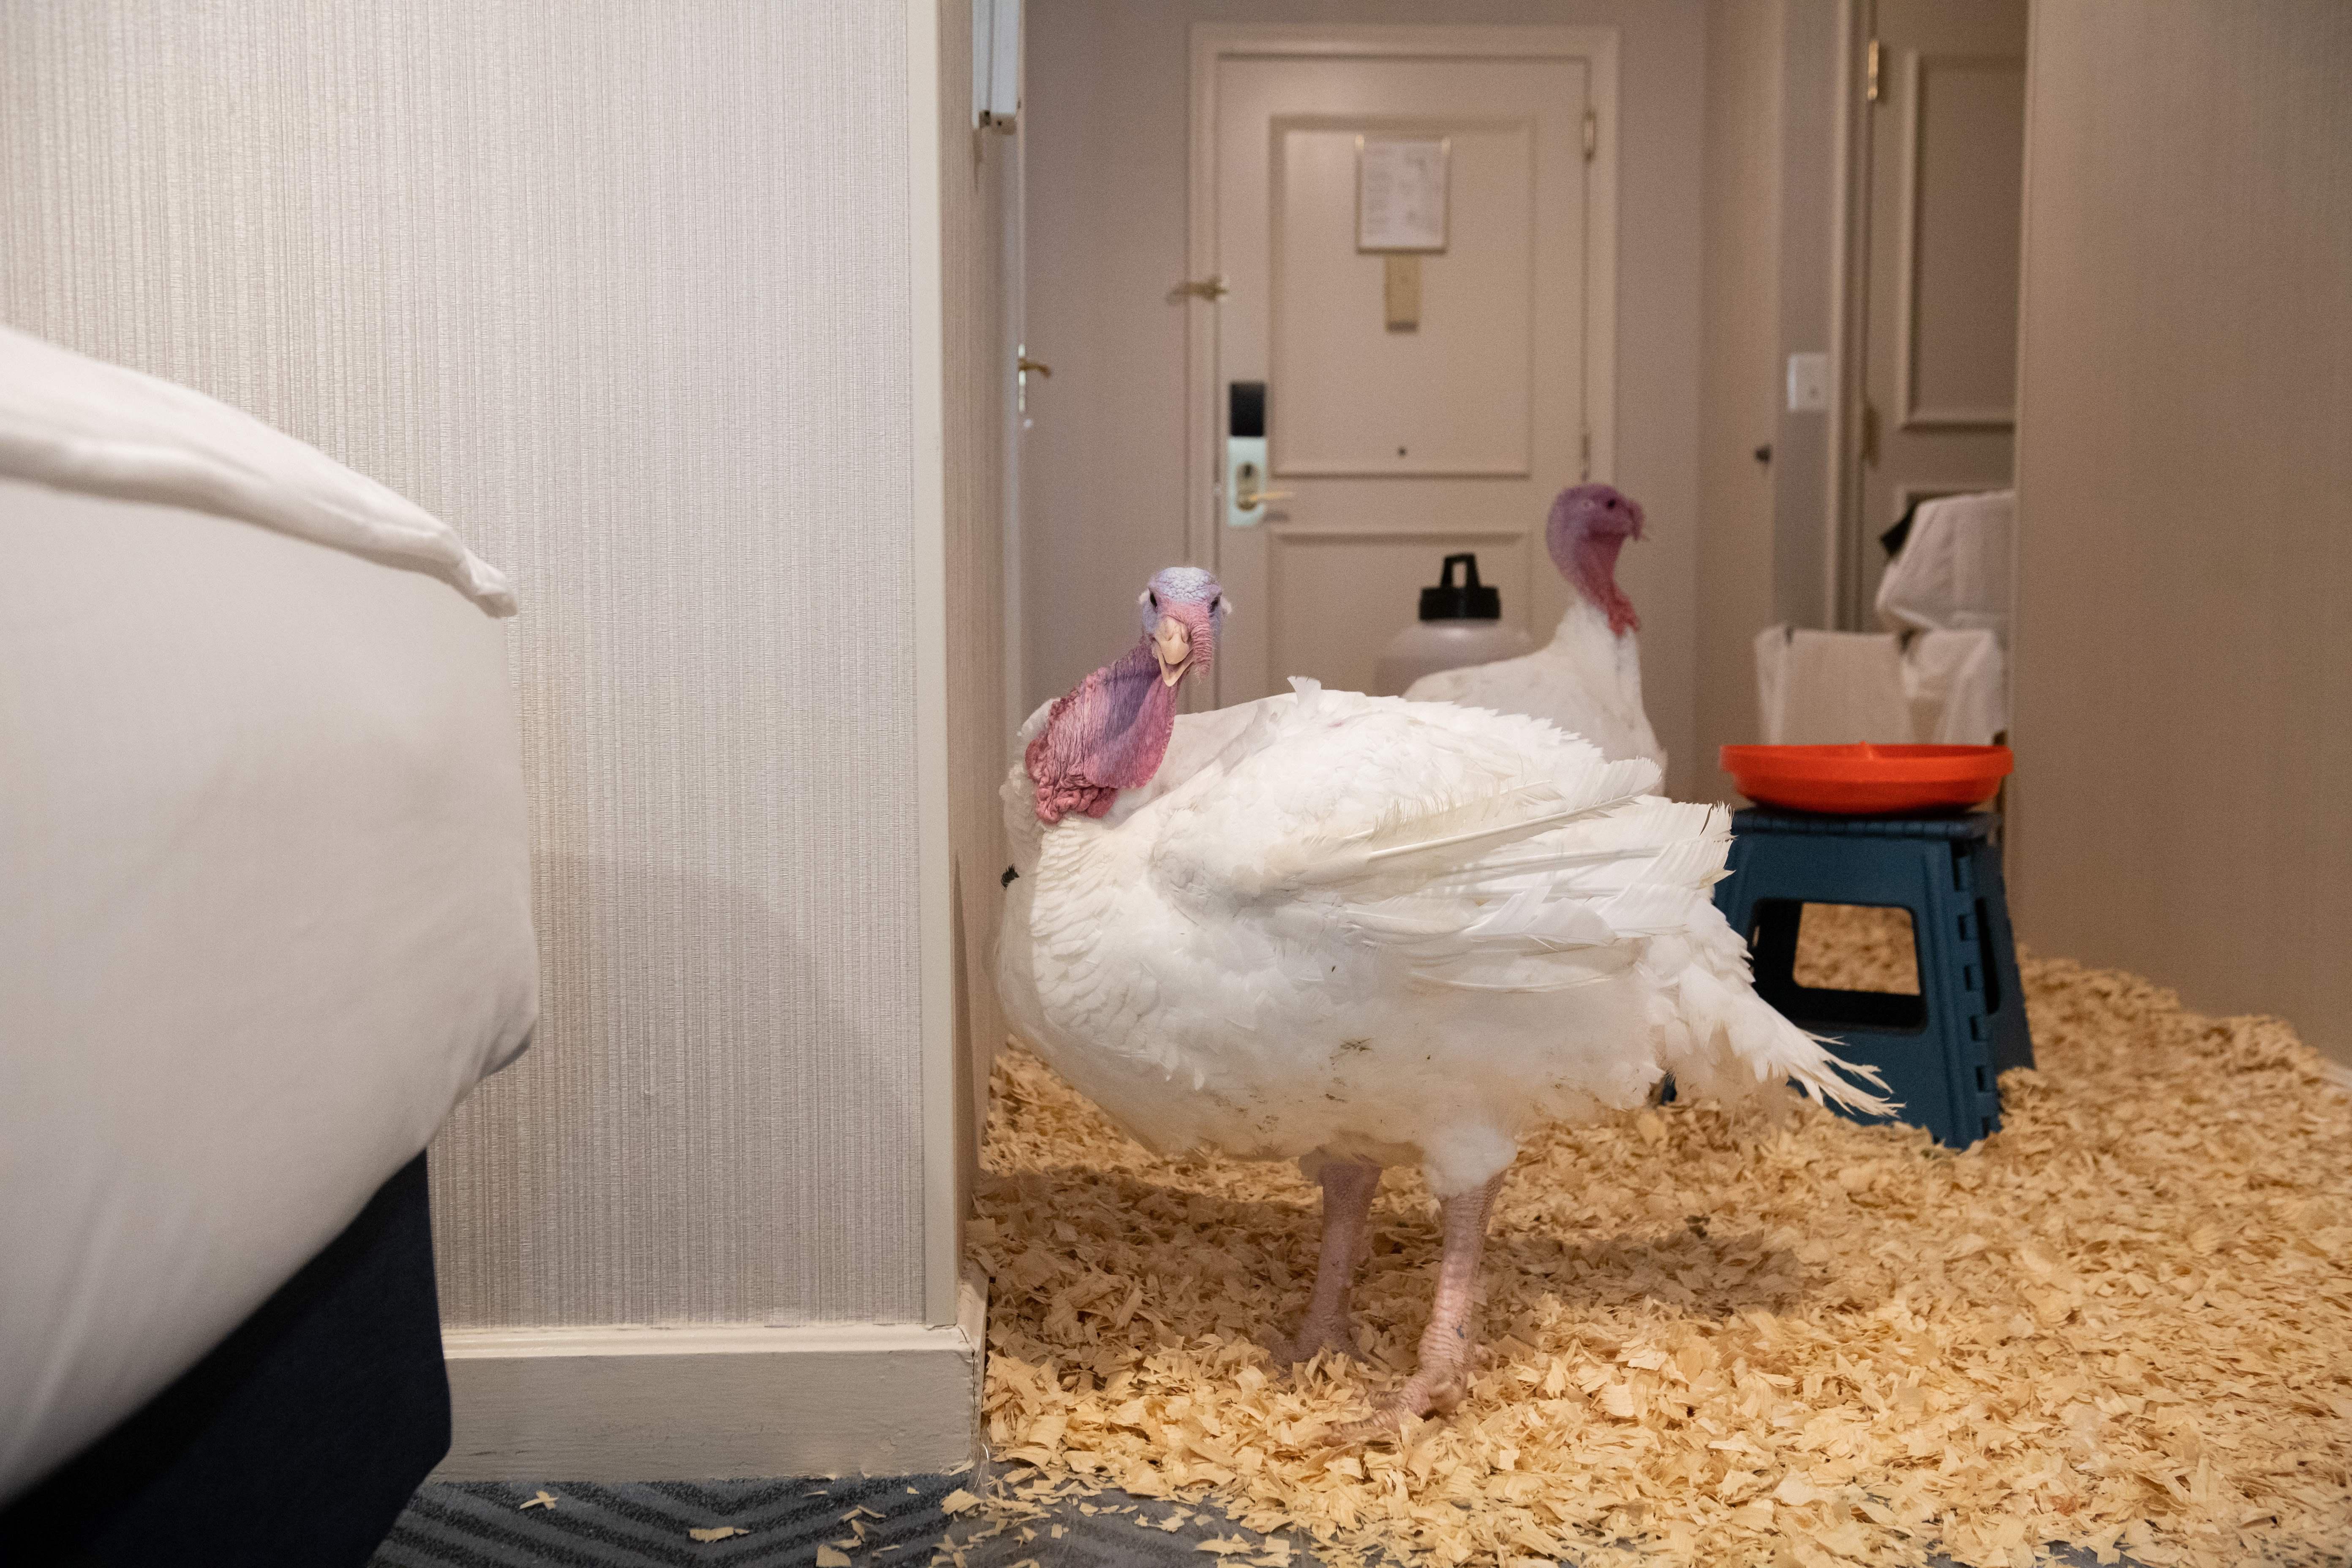 Two turkeys stand in the entryway of a hotel room. The carpet has been covered in wood shavings.